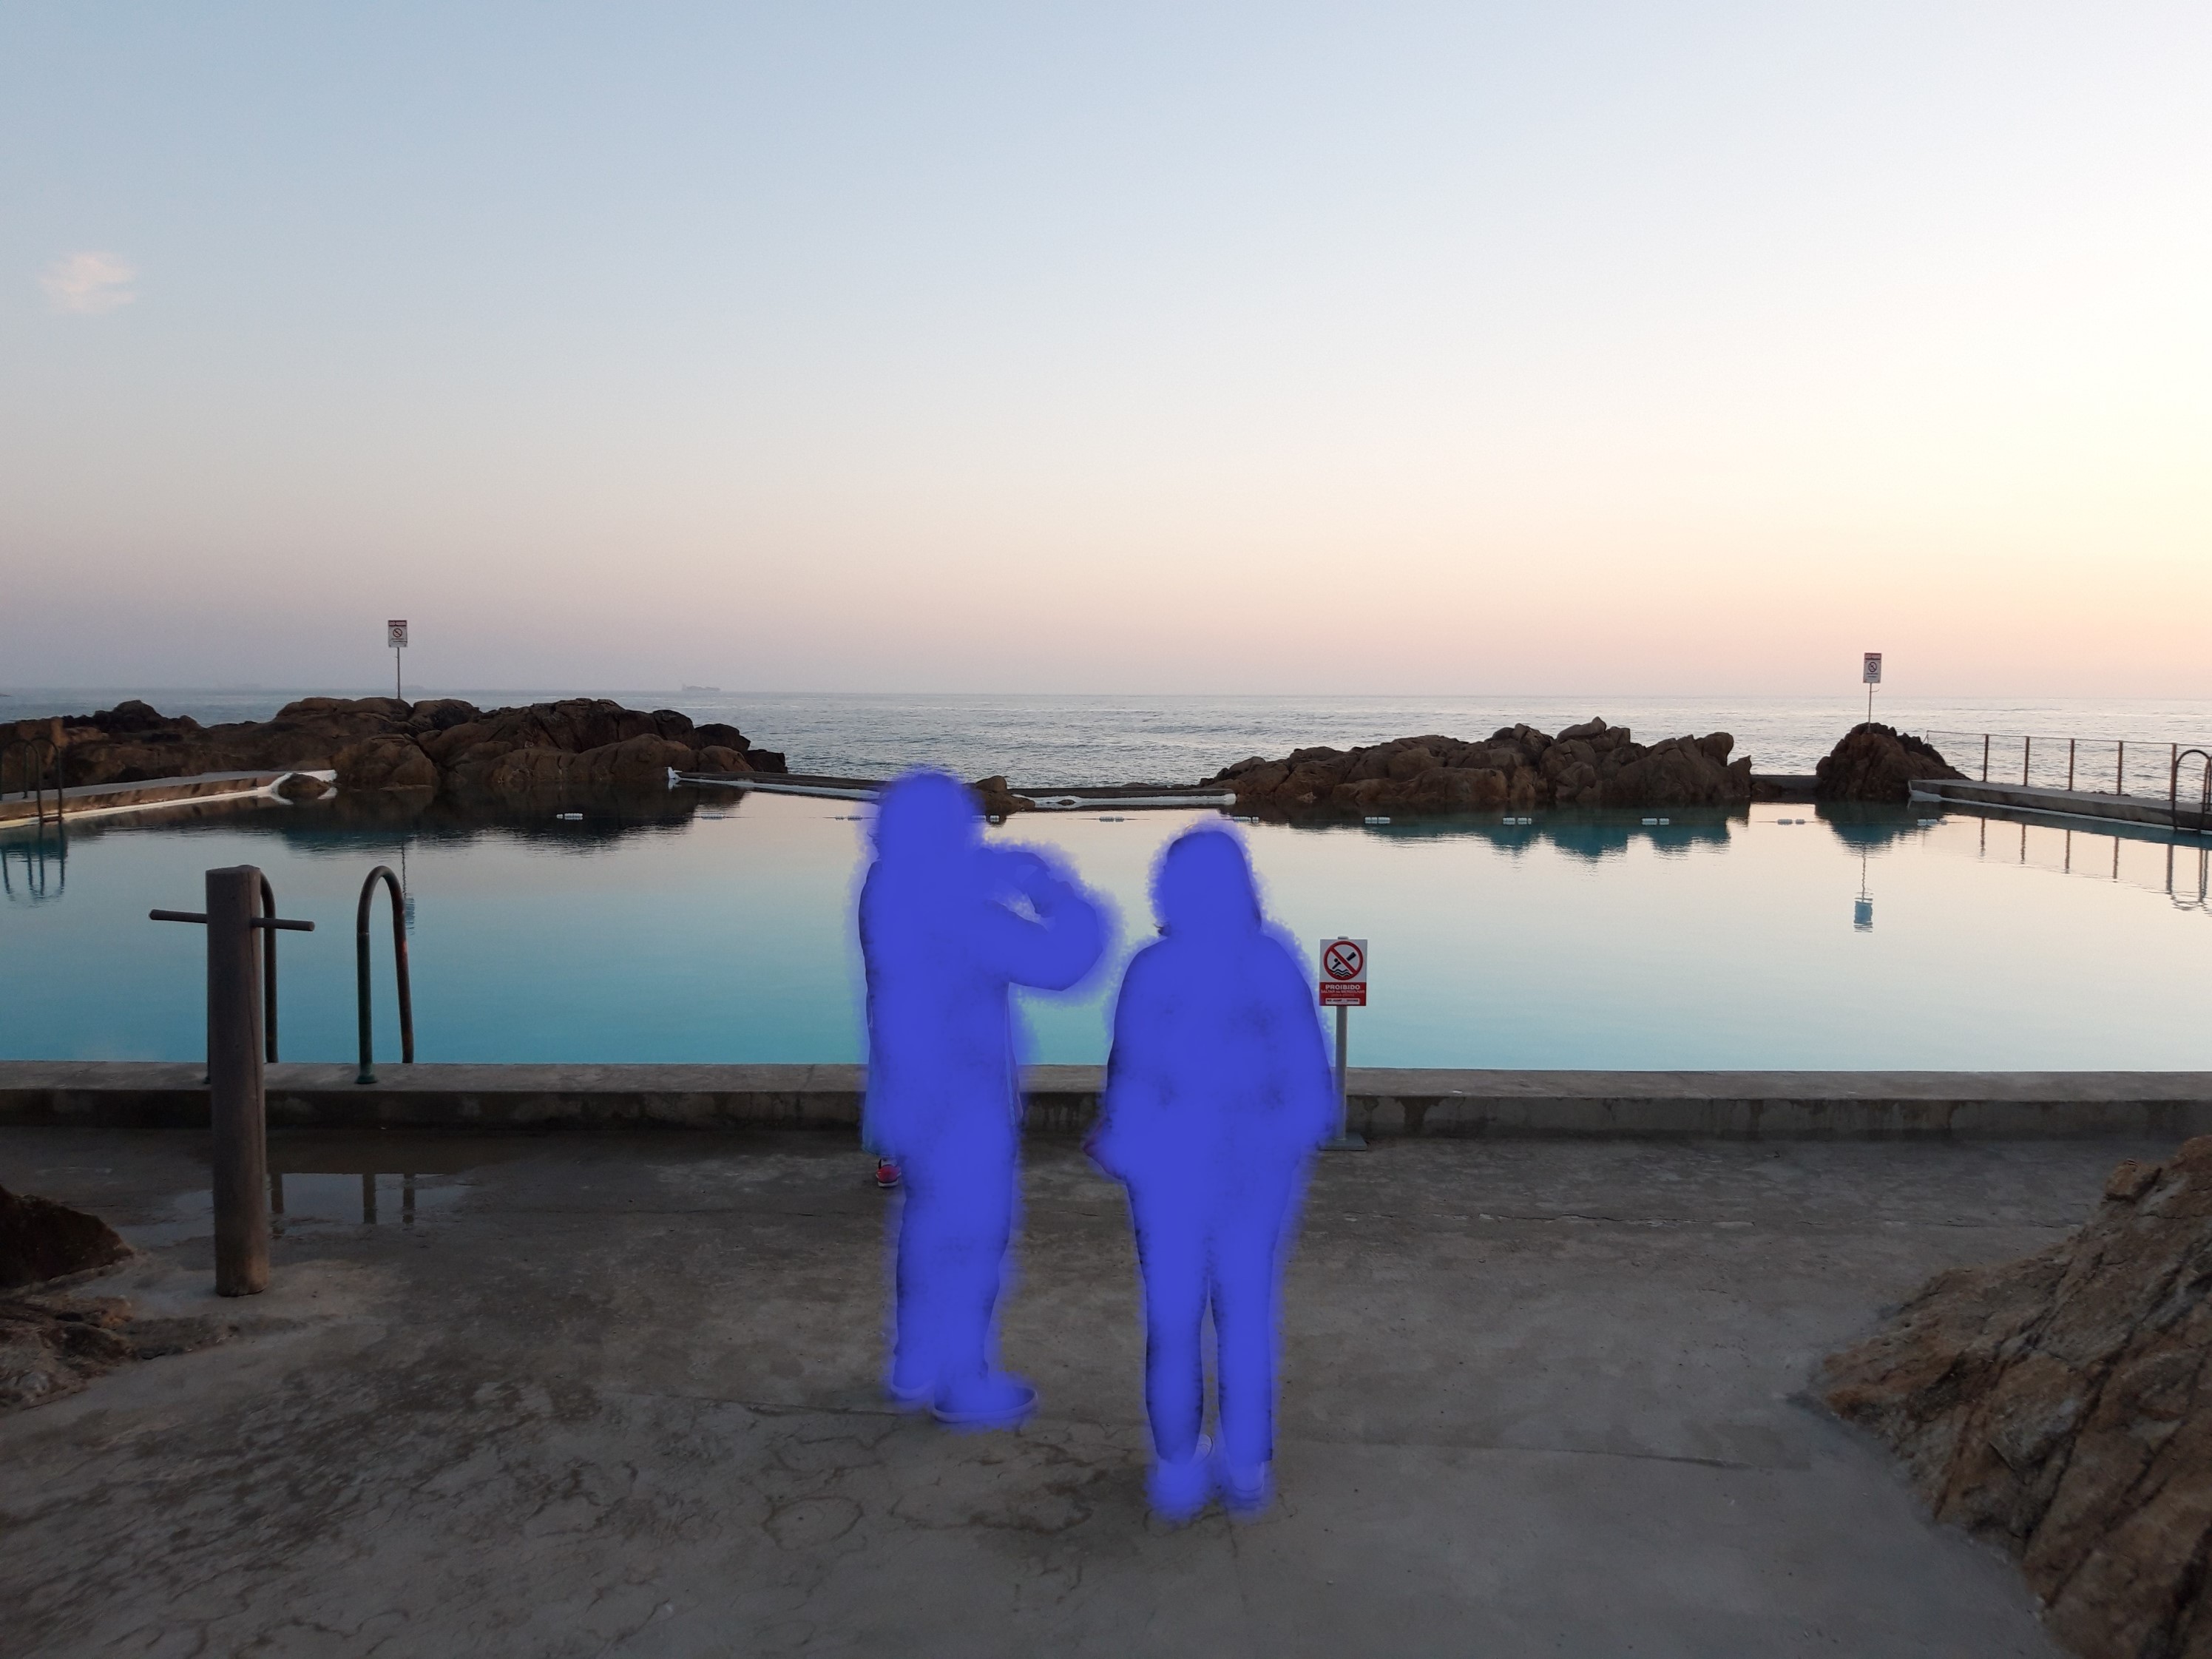 swimming pool at sunset,two blue figures stand in the middle of the picture